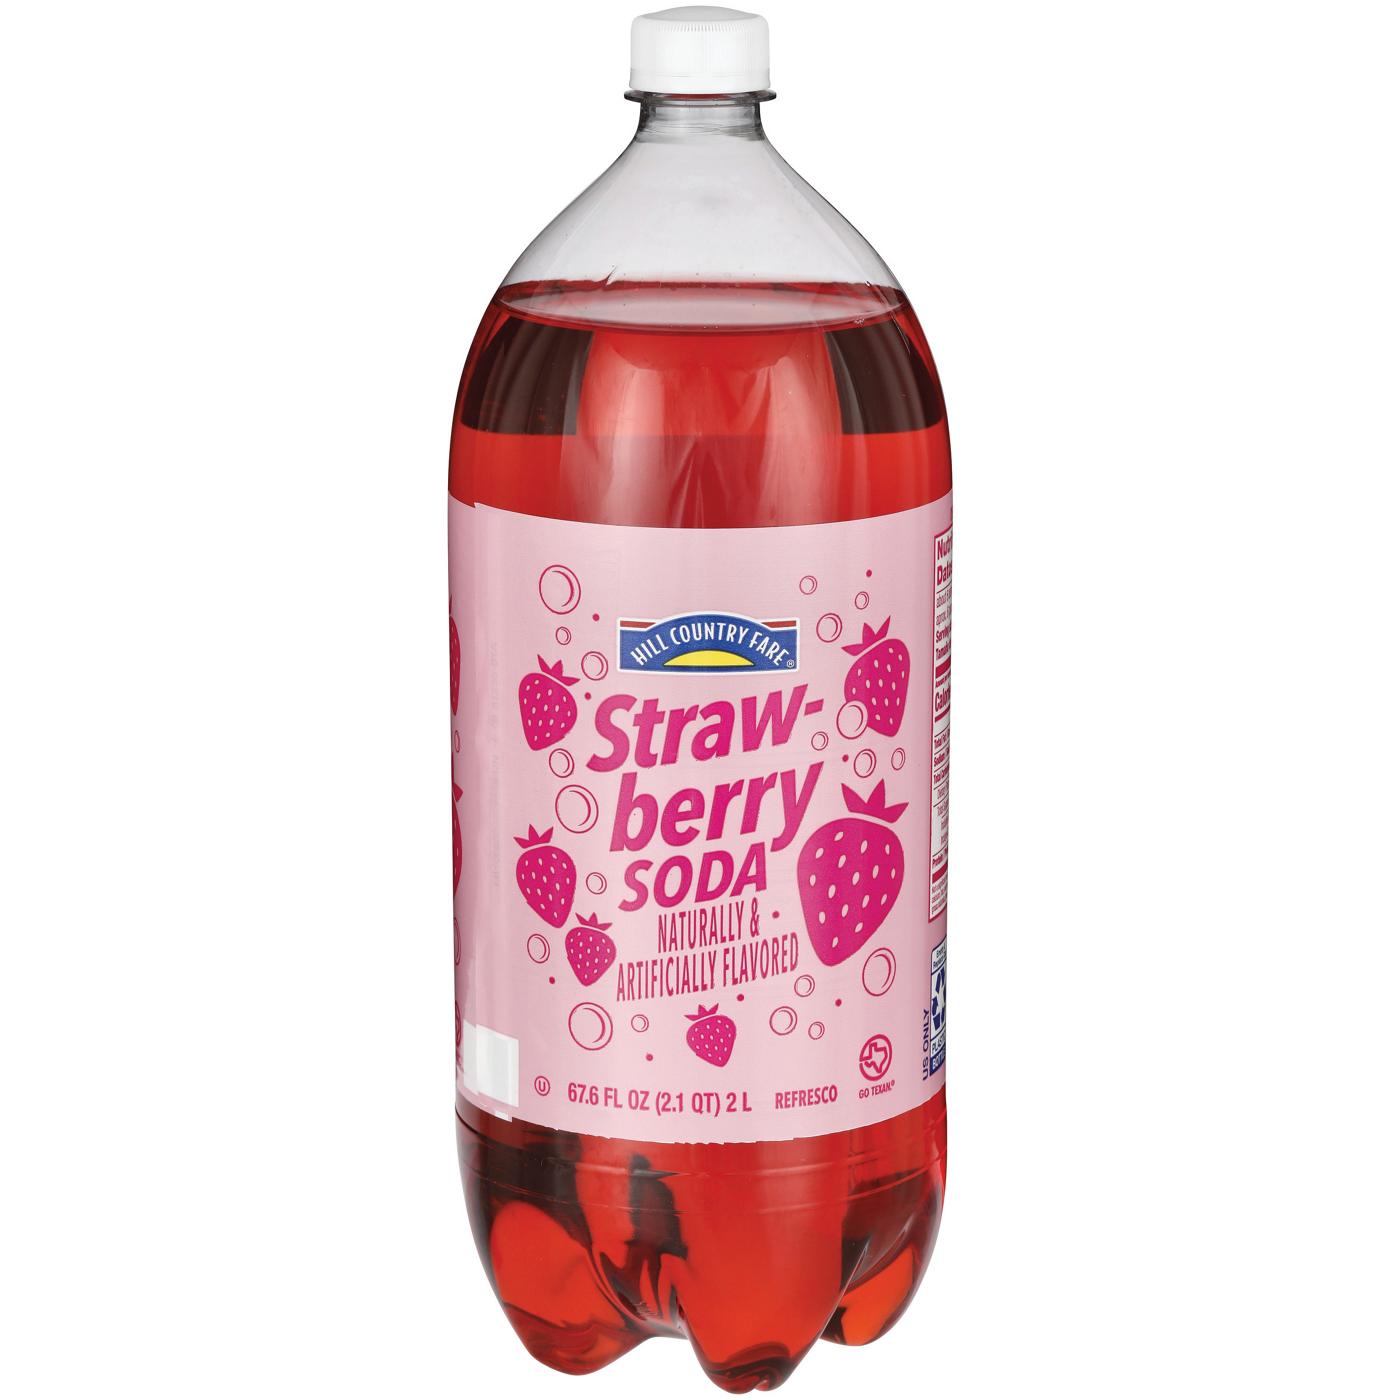 HCF Hill Country Fair Strawberry Soda; image 2 of 2